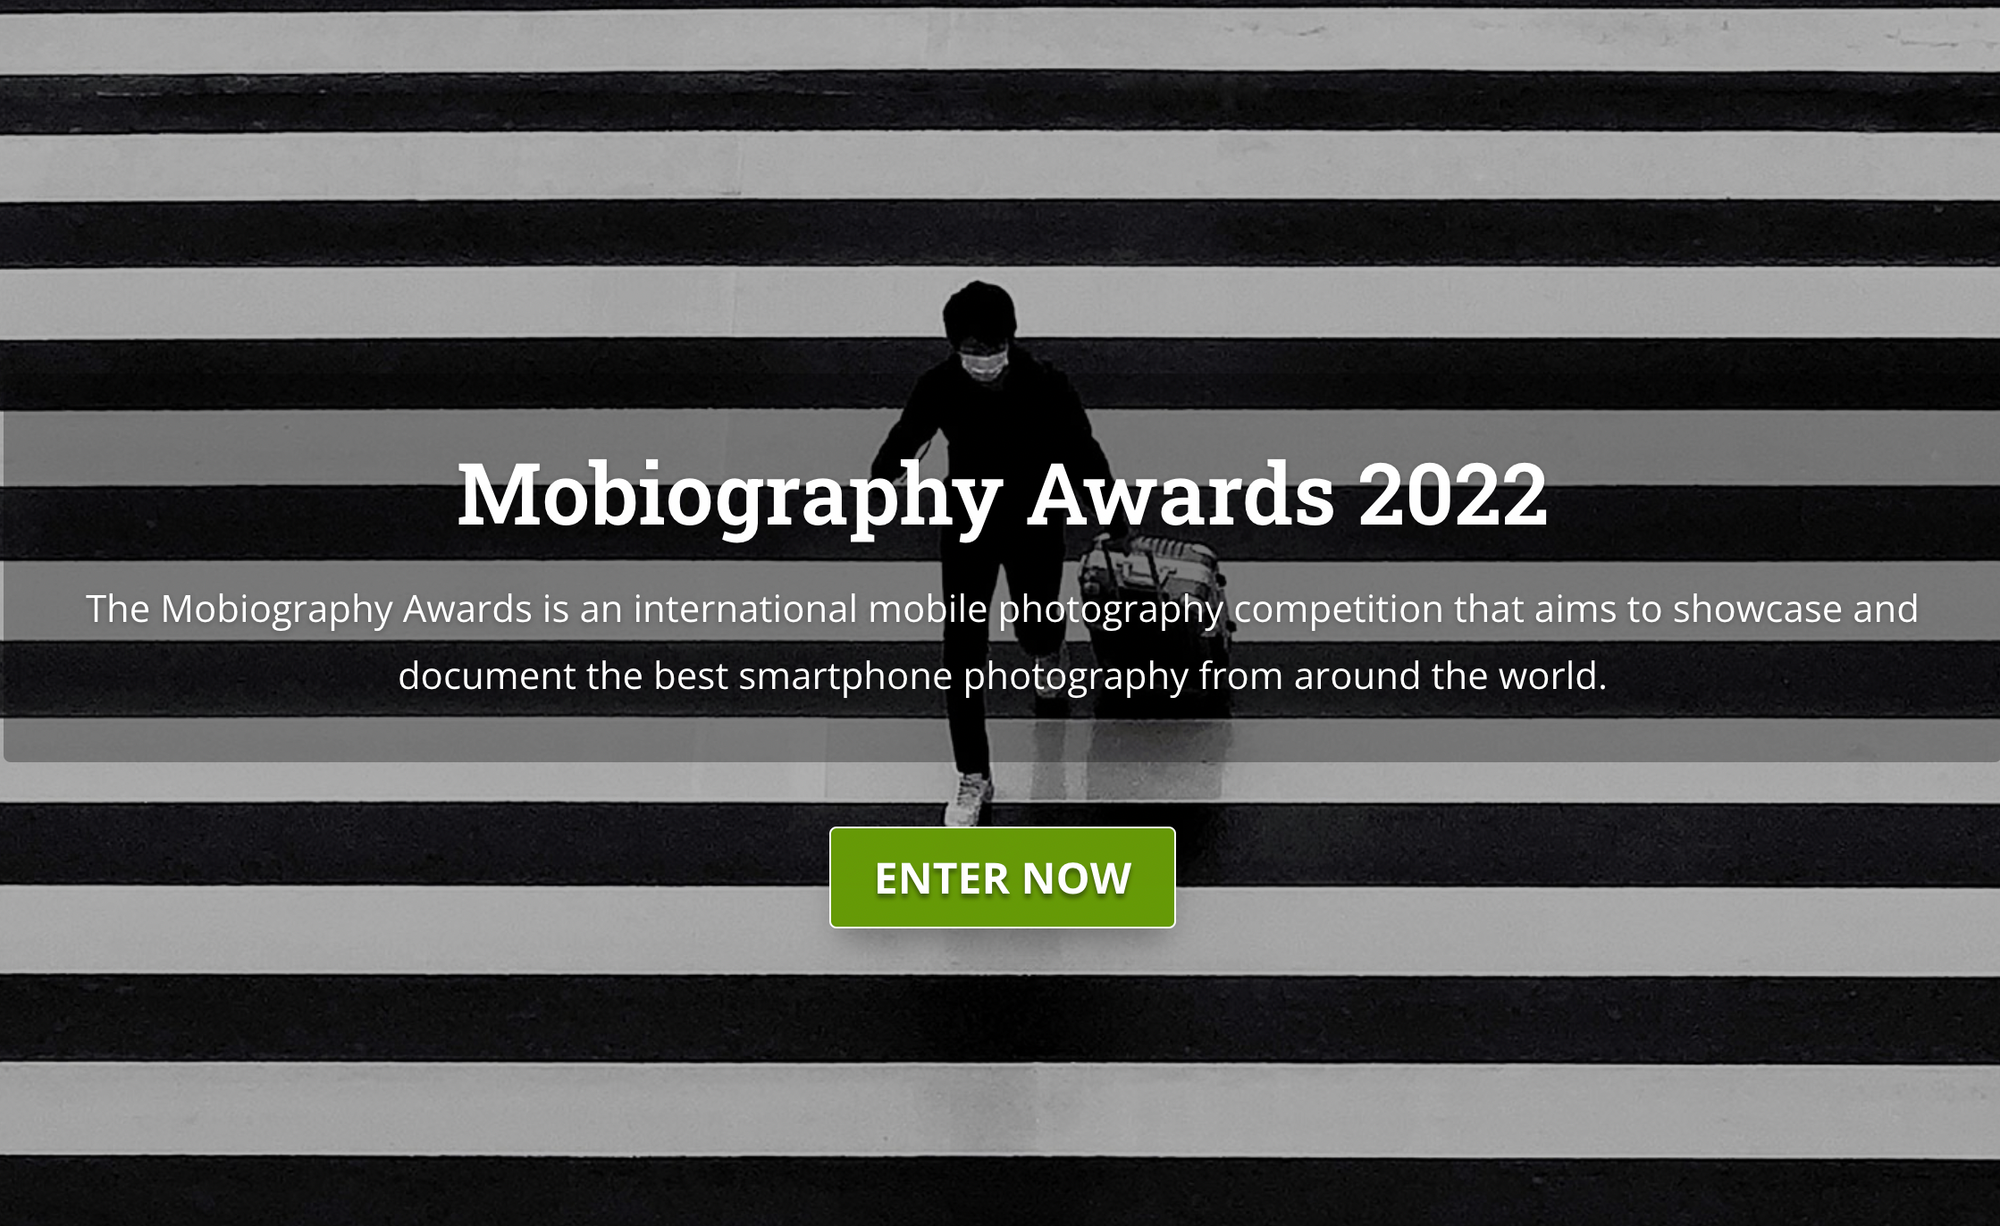 Mobiography Awards 2022 - more than just a photography competition